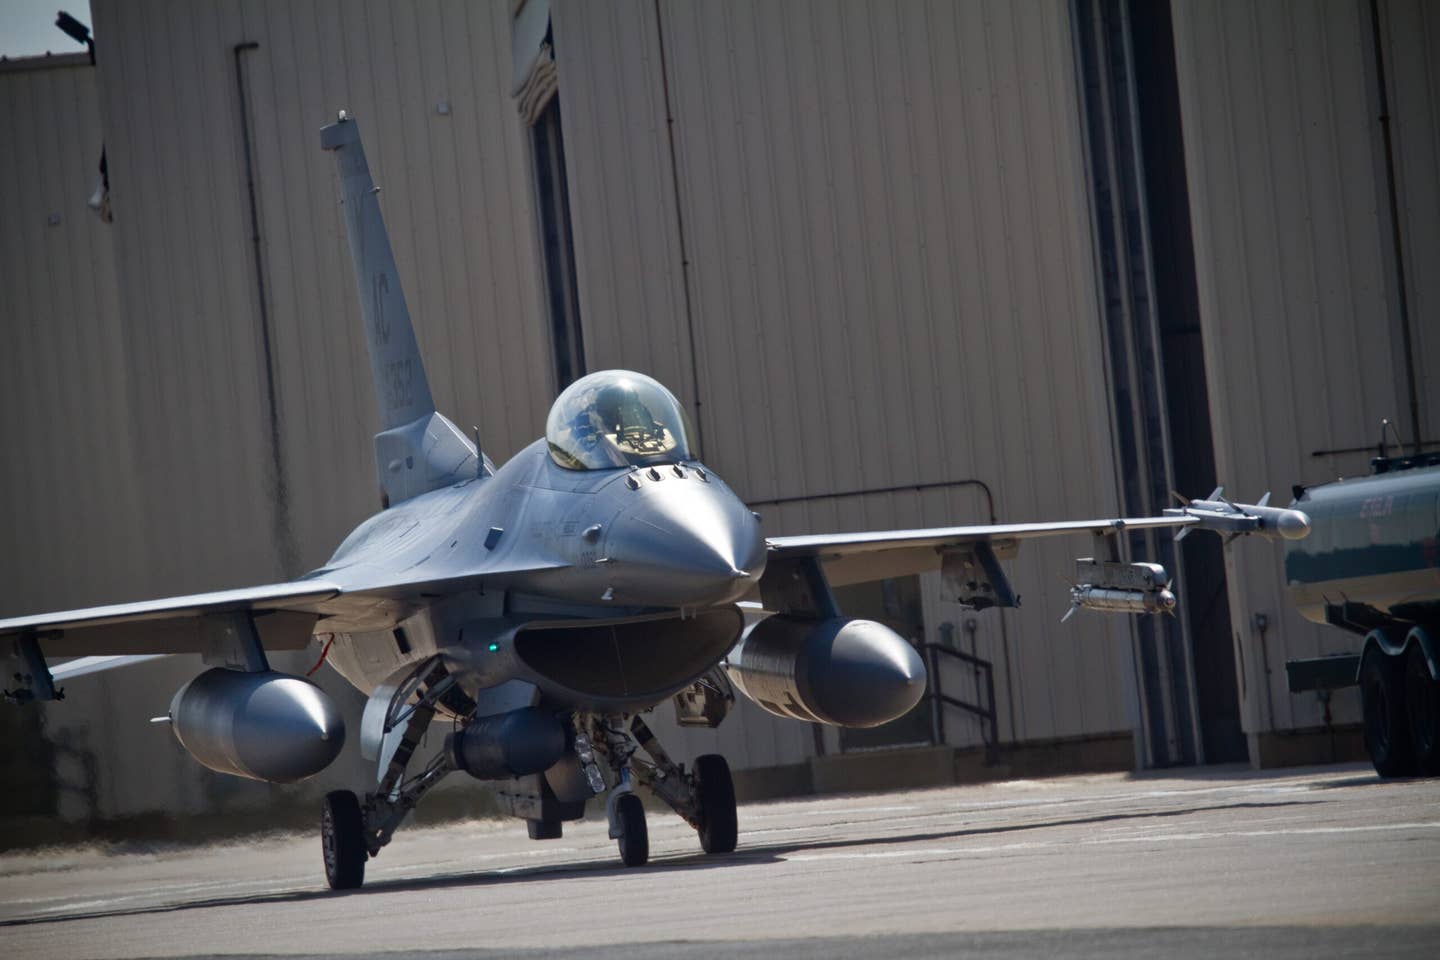 A U.S. Air Force F-16C Fighting Falcon from the New Jersey Air National Guard's 177th Fighter Wing "Jersey Devils" taxis at Atlantic City Air National Guard Base, N.J. on May 17, 2014.<em> Credit: Tech. Sgt. Matt Hecht/U.S. Air Force</em>